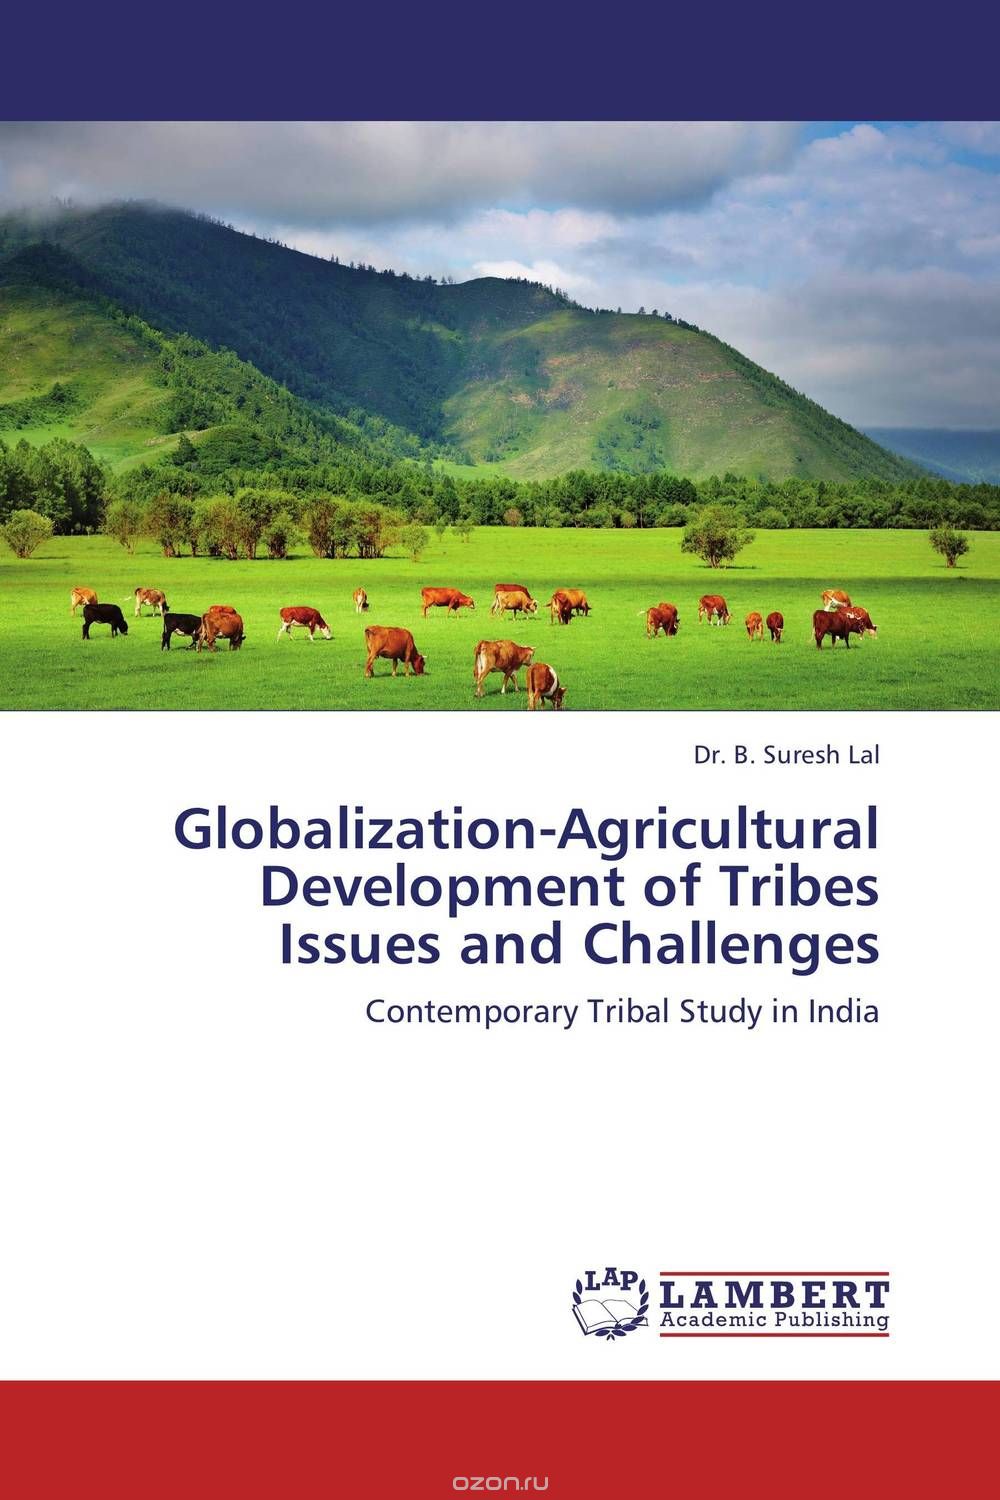 Скачать книгу "Globalization-Agricultural Development of Tribes Issues and Challenges"